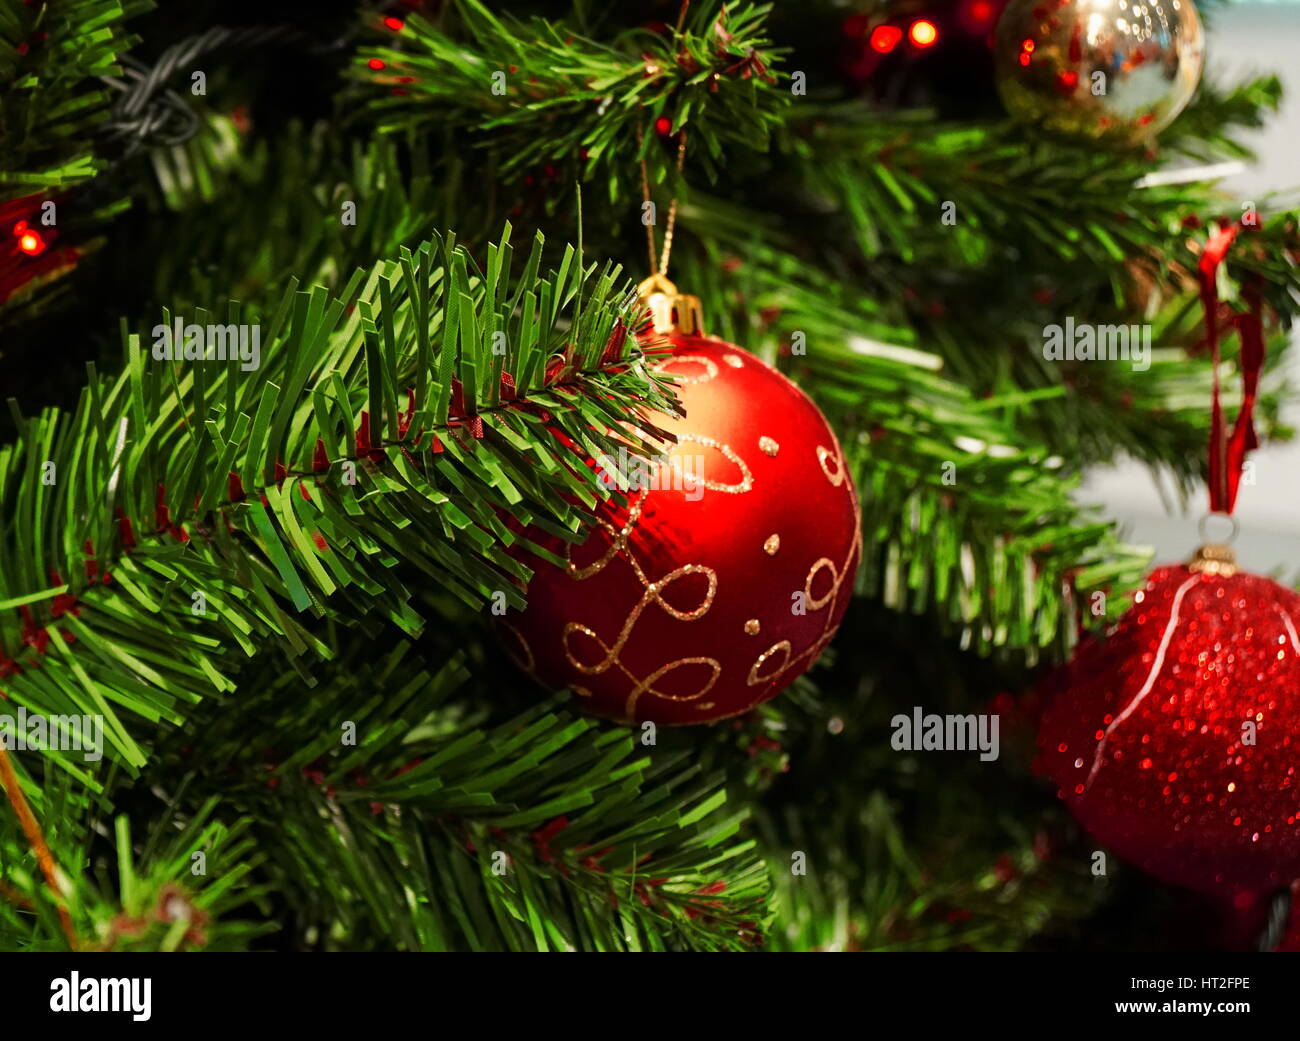 A Christmas tree with decorations and ornaments Stock Photo - Alamy